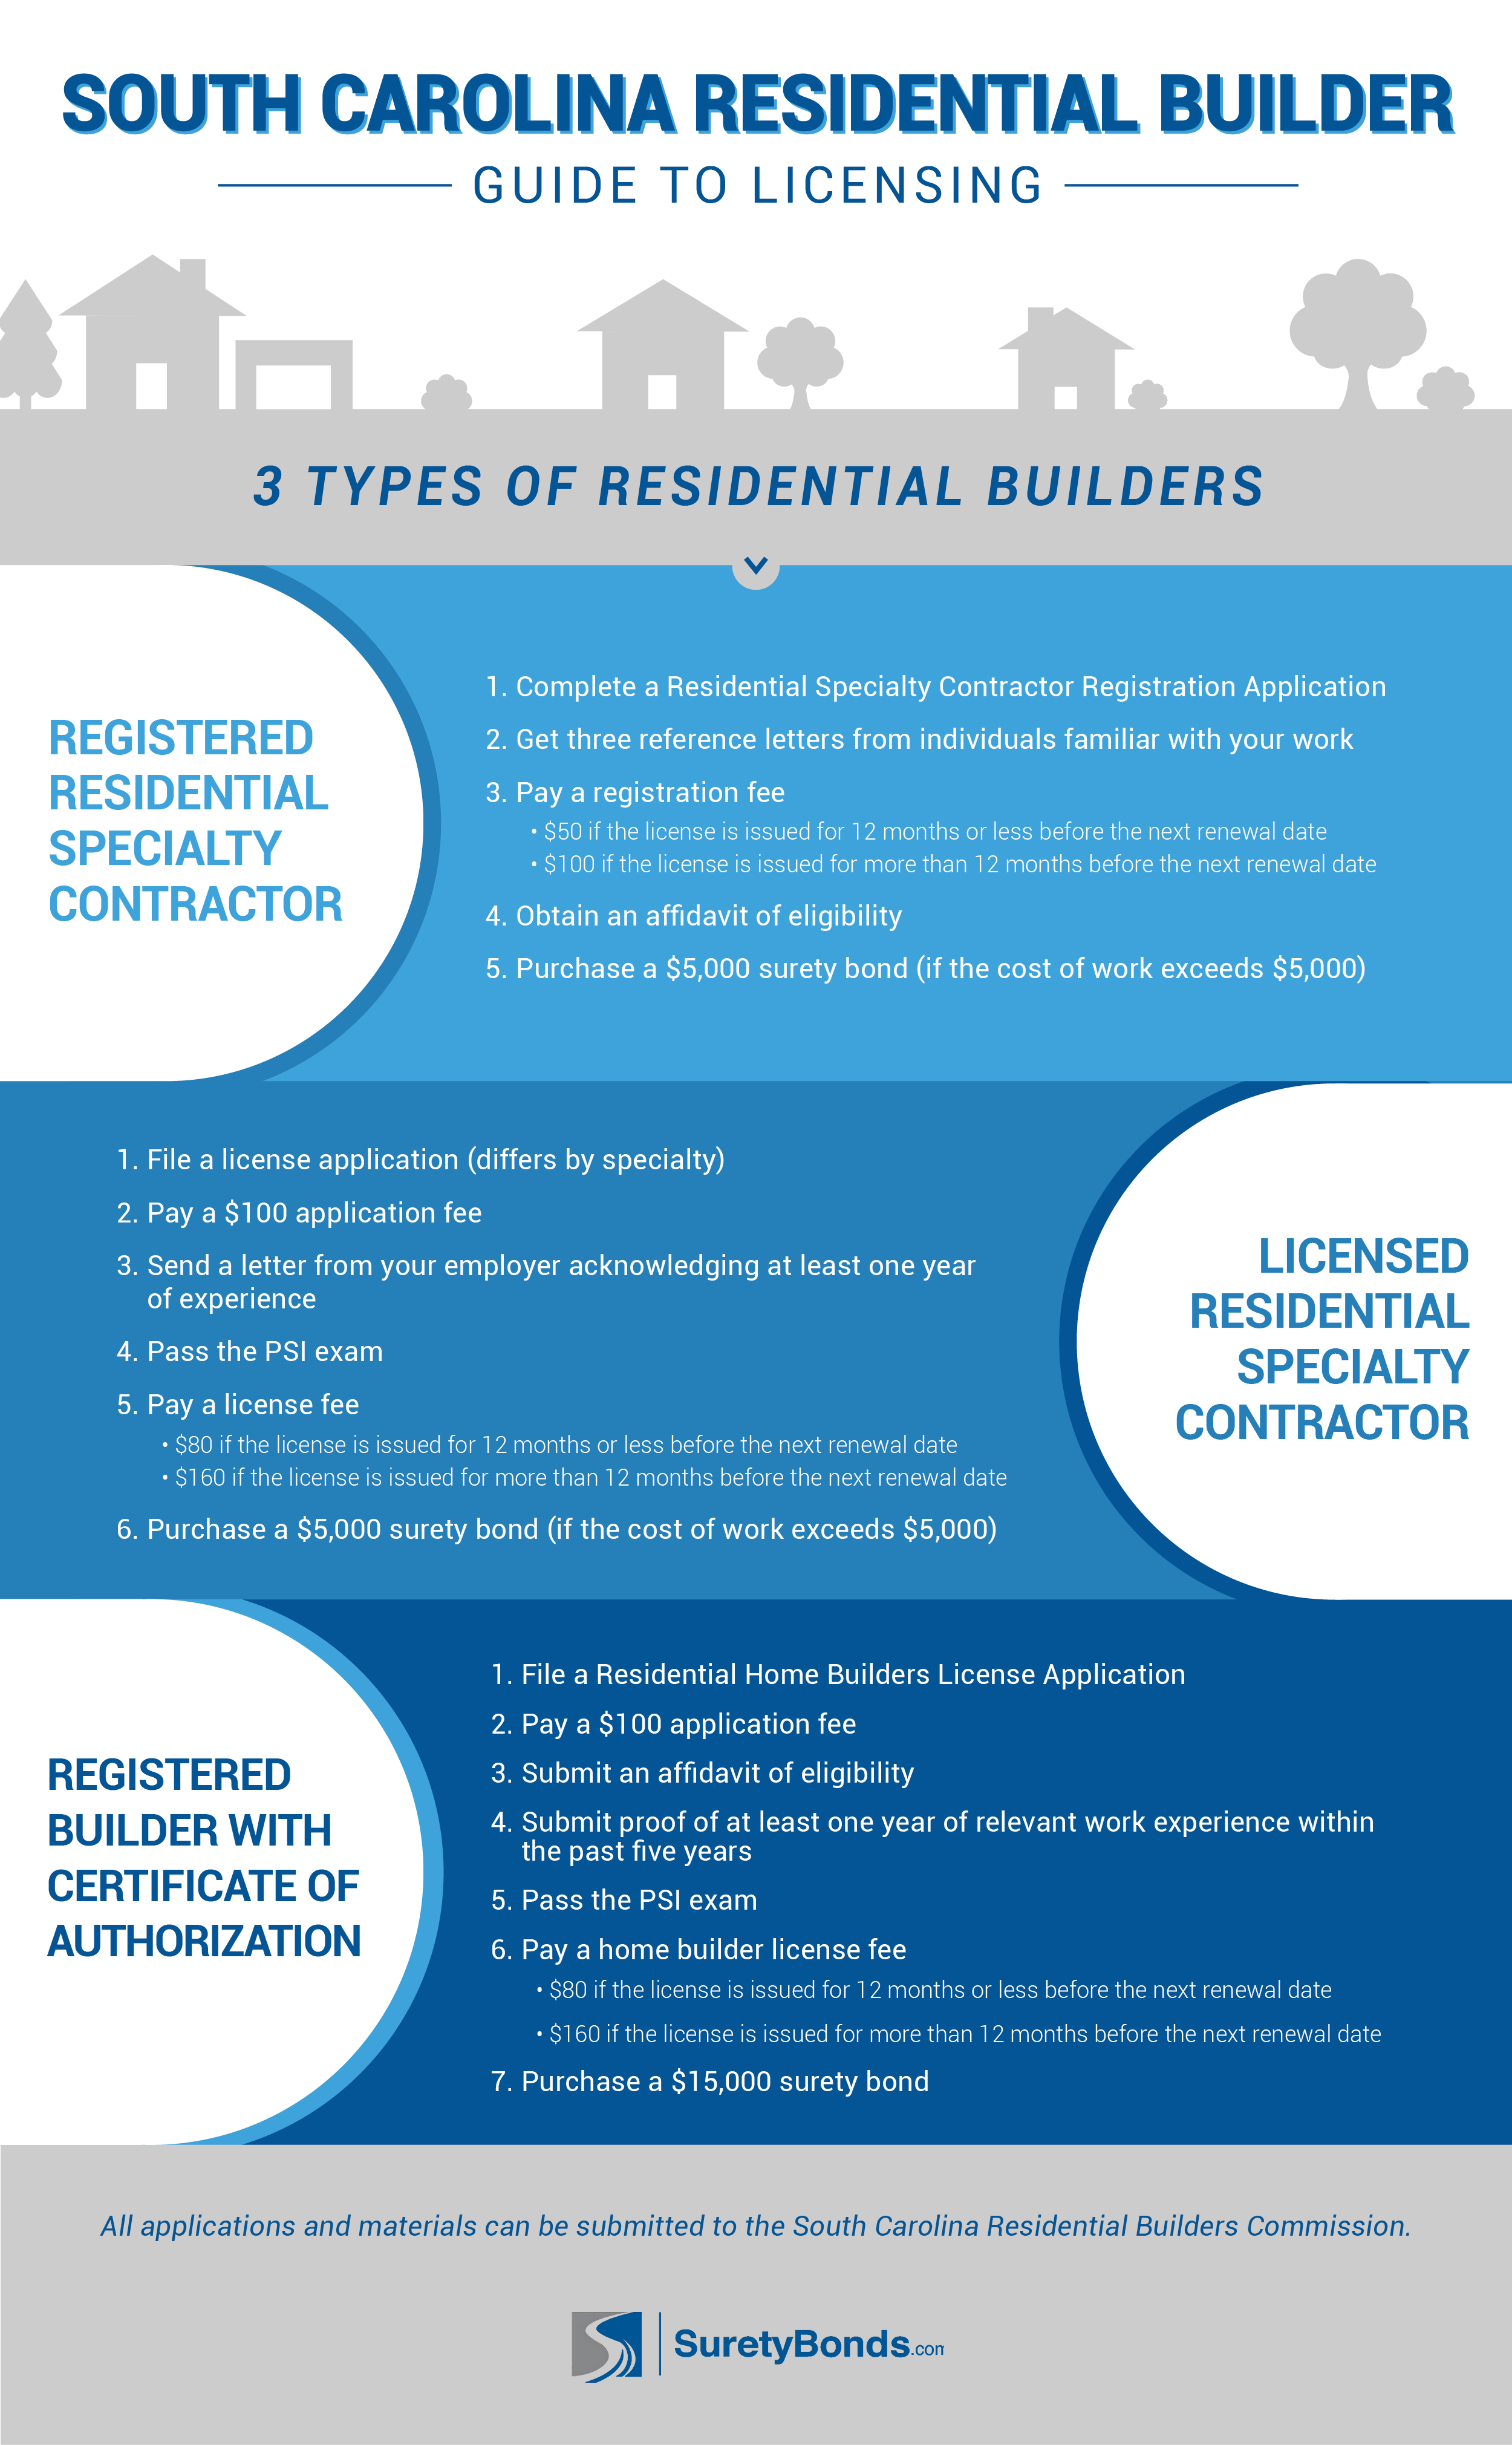 3 types of residential builders: registered or licensed specialty contractor and registered builder.